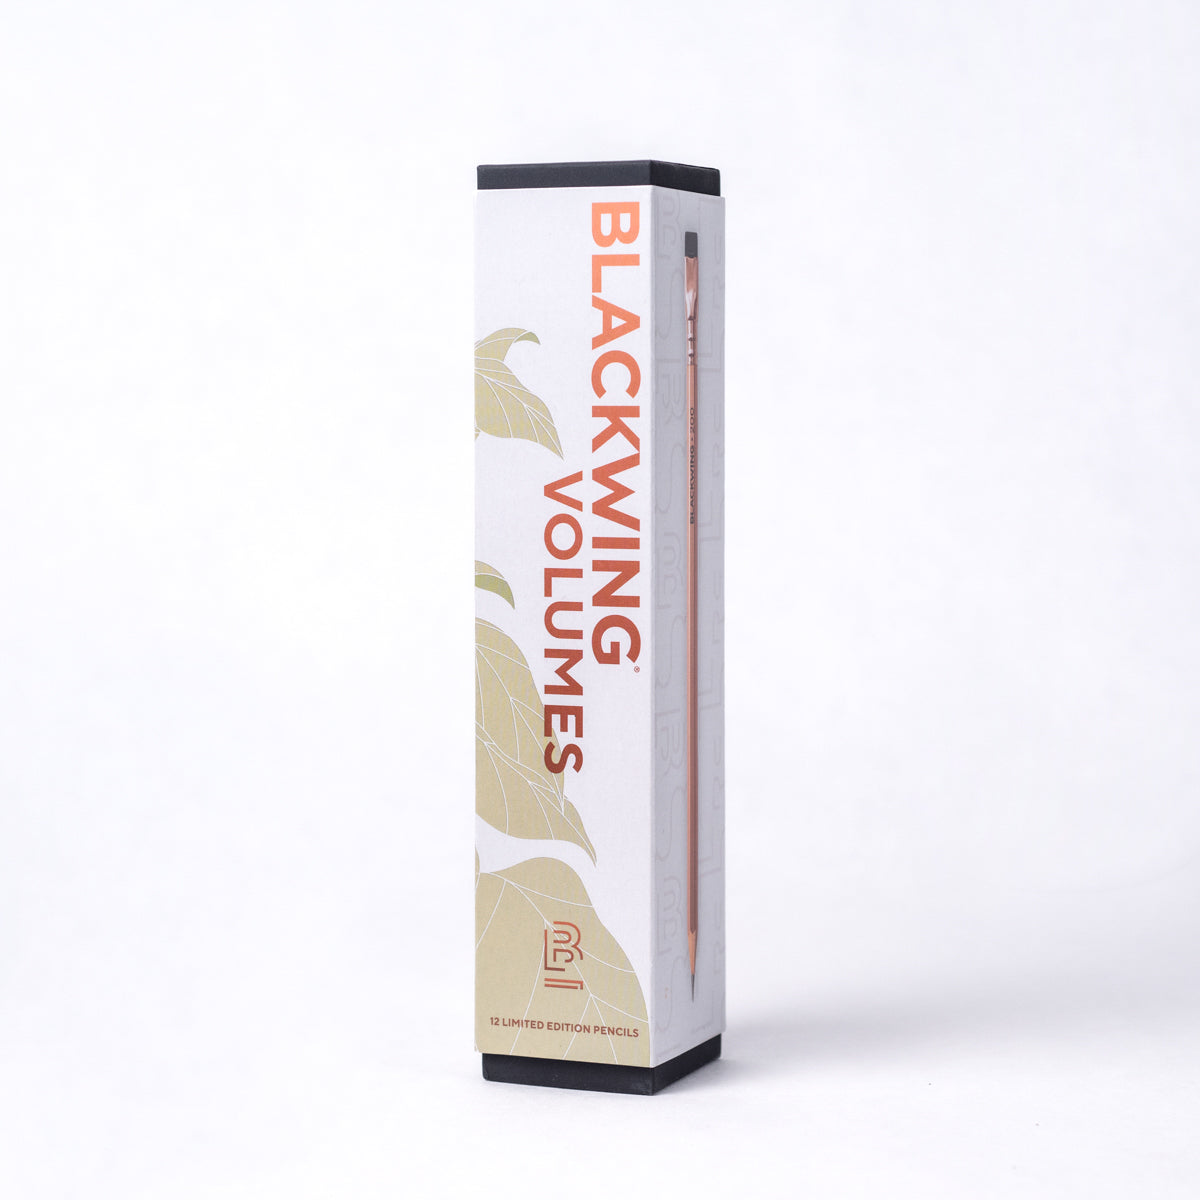 A box of Blackwing Volume 200 (Set of 12), symbolizing creativity and the Beat Generation, displayed on a white background.